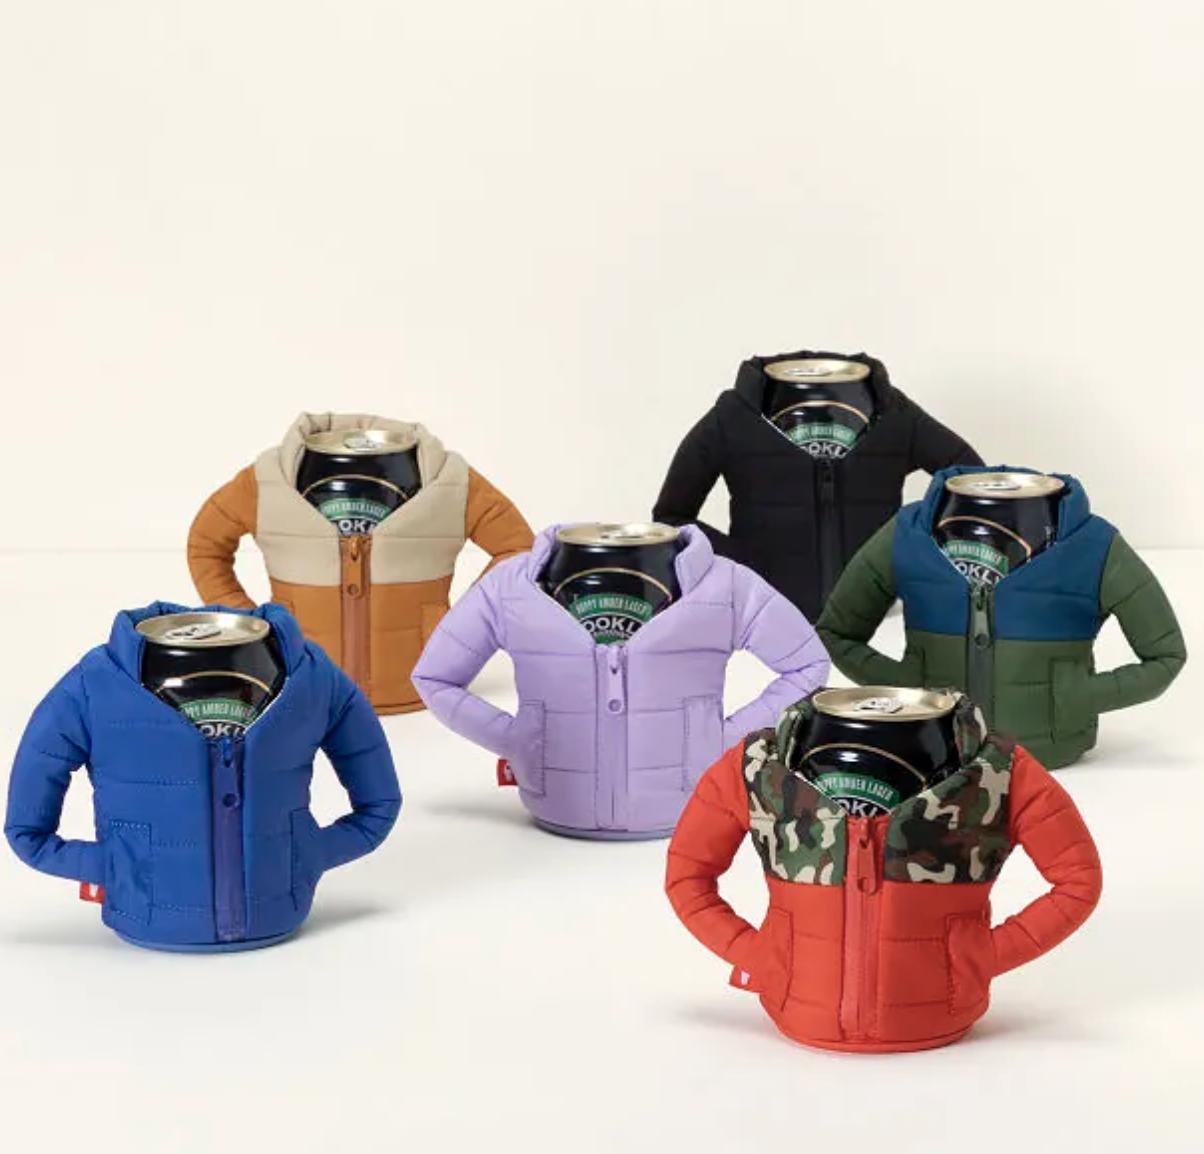 five cans of beer in coozies that look like zip up coats in various colors